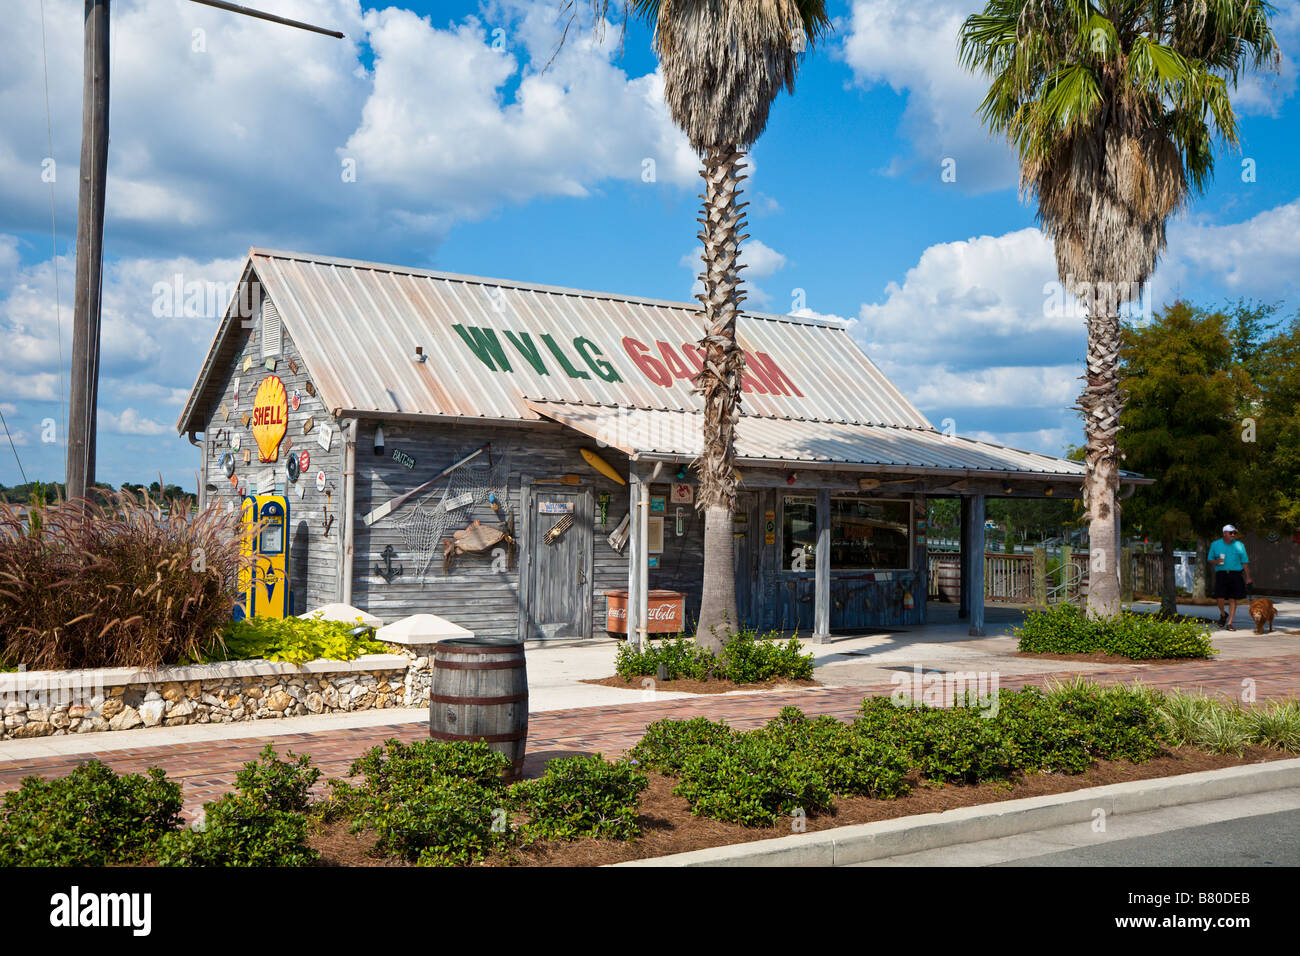 Building in The Villages retirement community in Central Florida decorated with antique petrol fuel pump and memorabilia Stock Photo